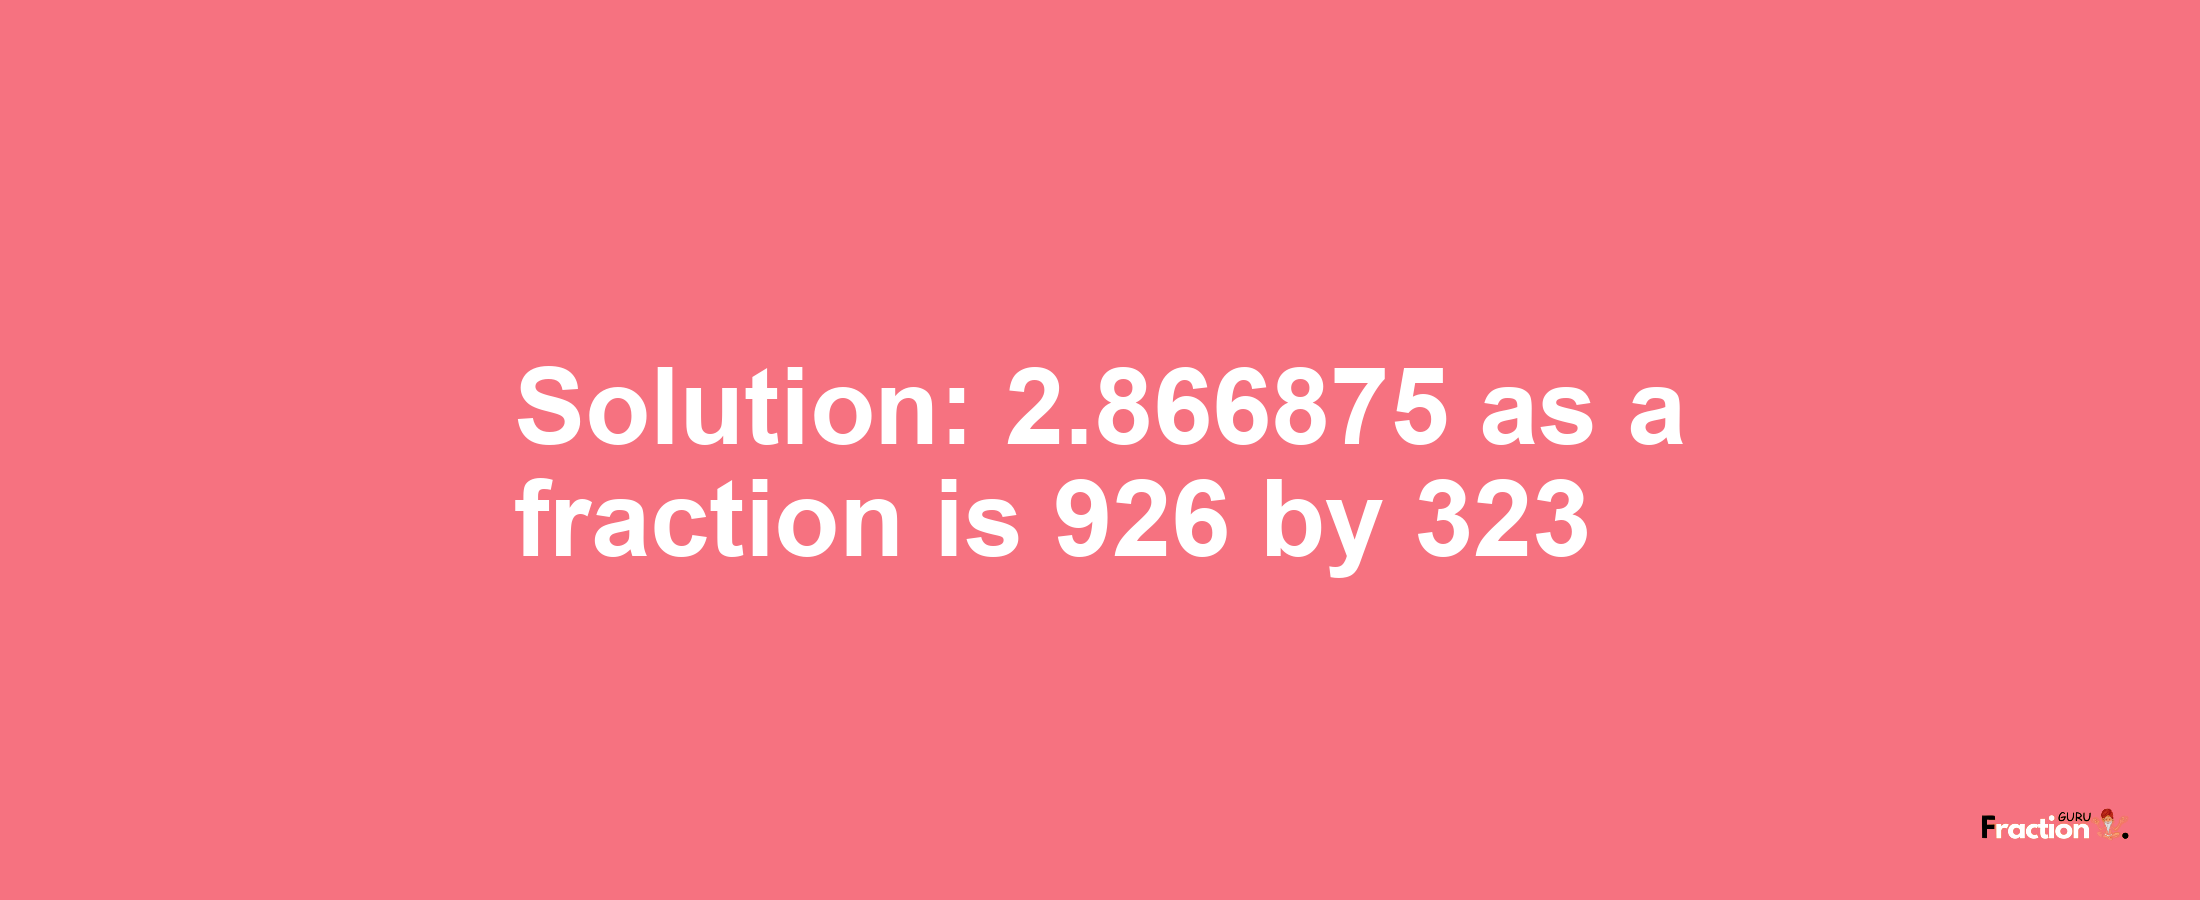 Solution:2.866875 as a fraction is 926/323